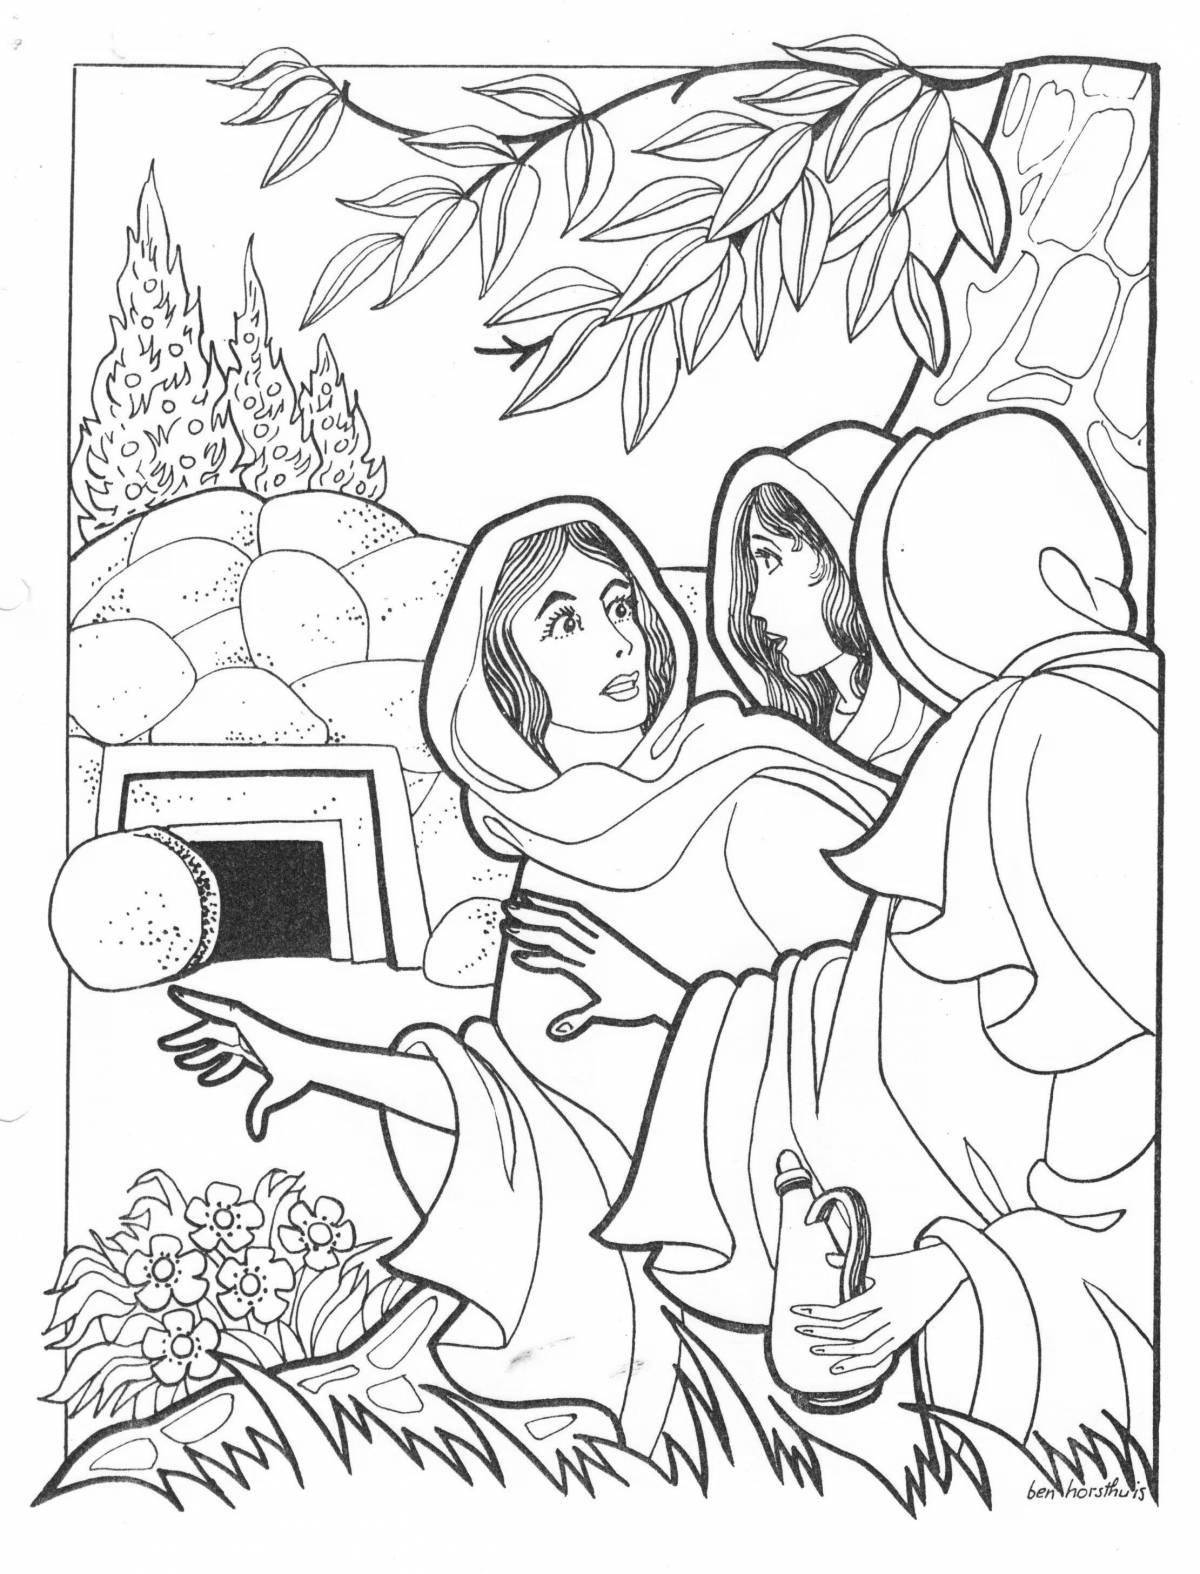 Great Sunday school coloring book